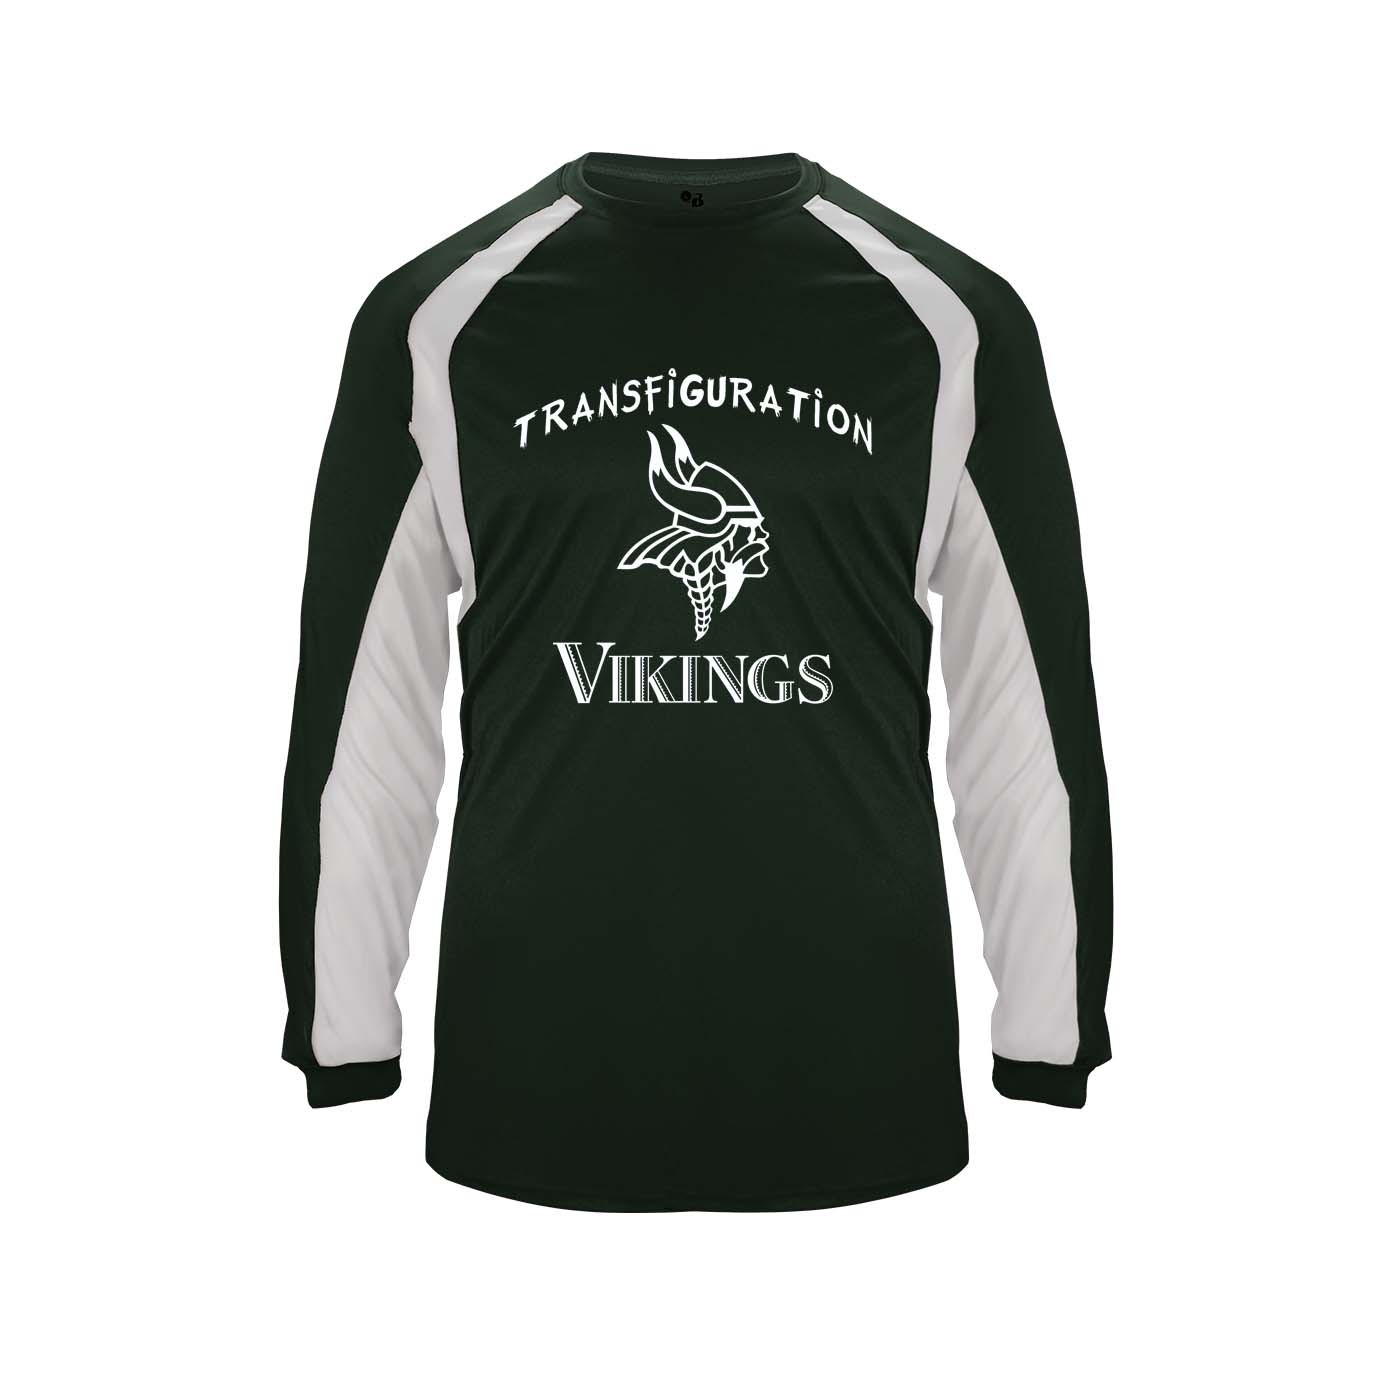 Transfiguration Spirit Hook L/S T-Shirt w/ Logo - Please Allow 2-3 Weeks for Delivery